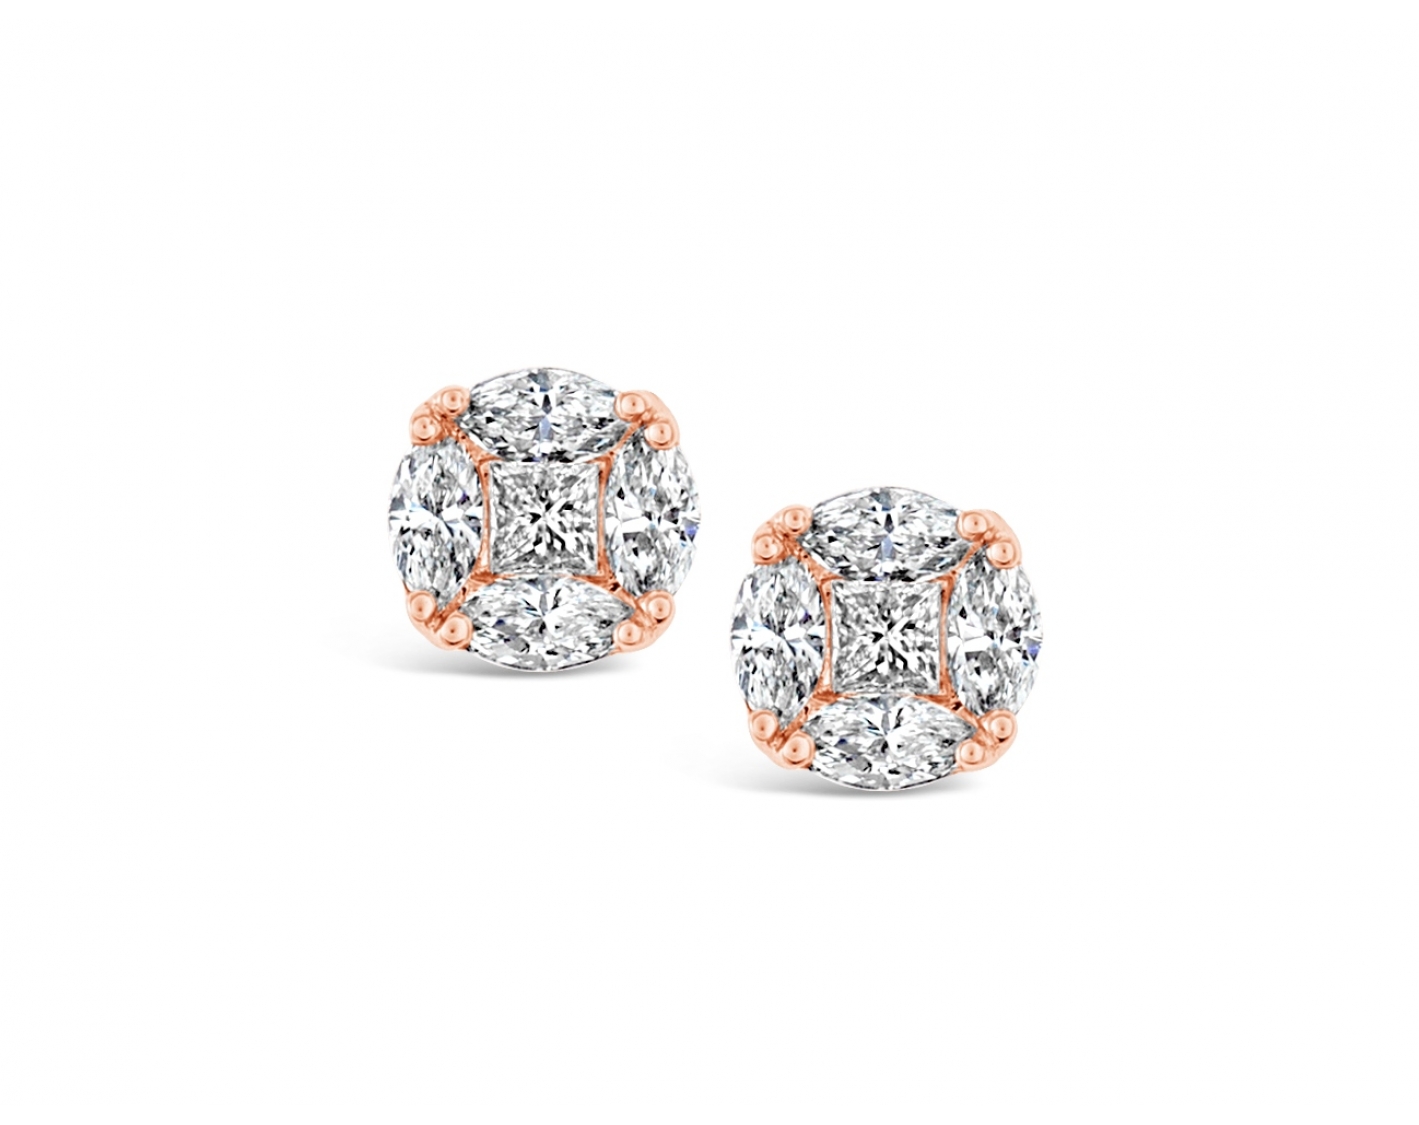 18k yellow gold illusion set stud earrings with princess & marquises diamonds Photos & images